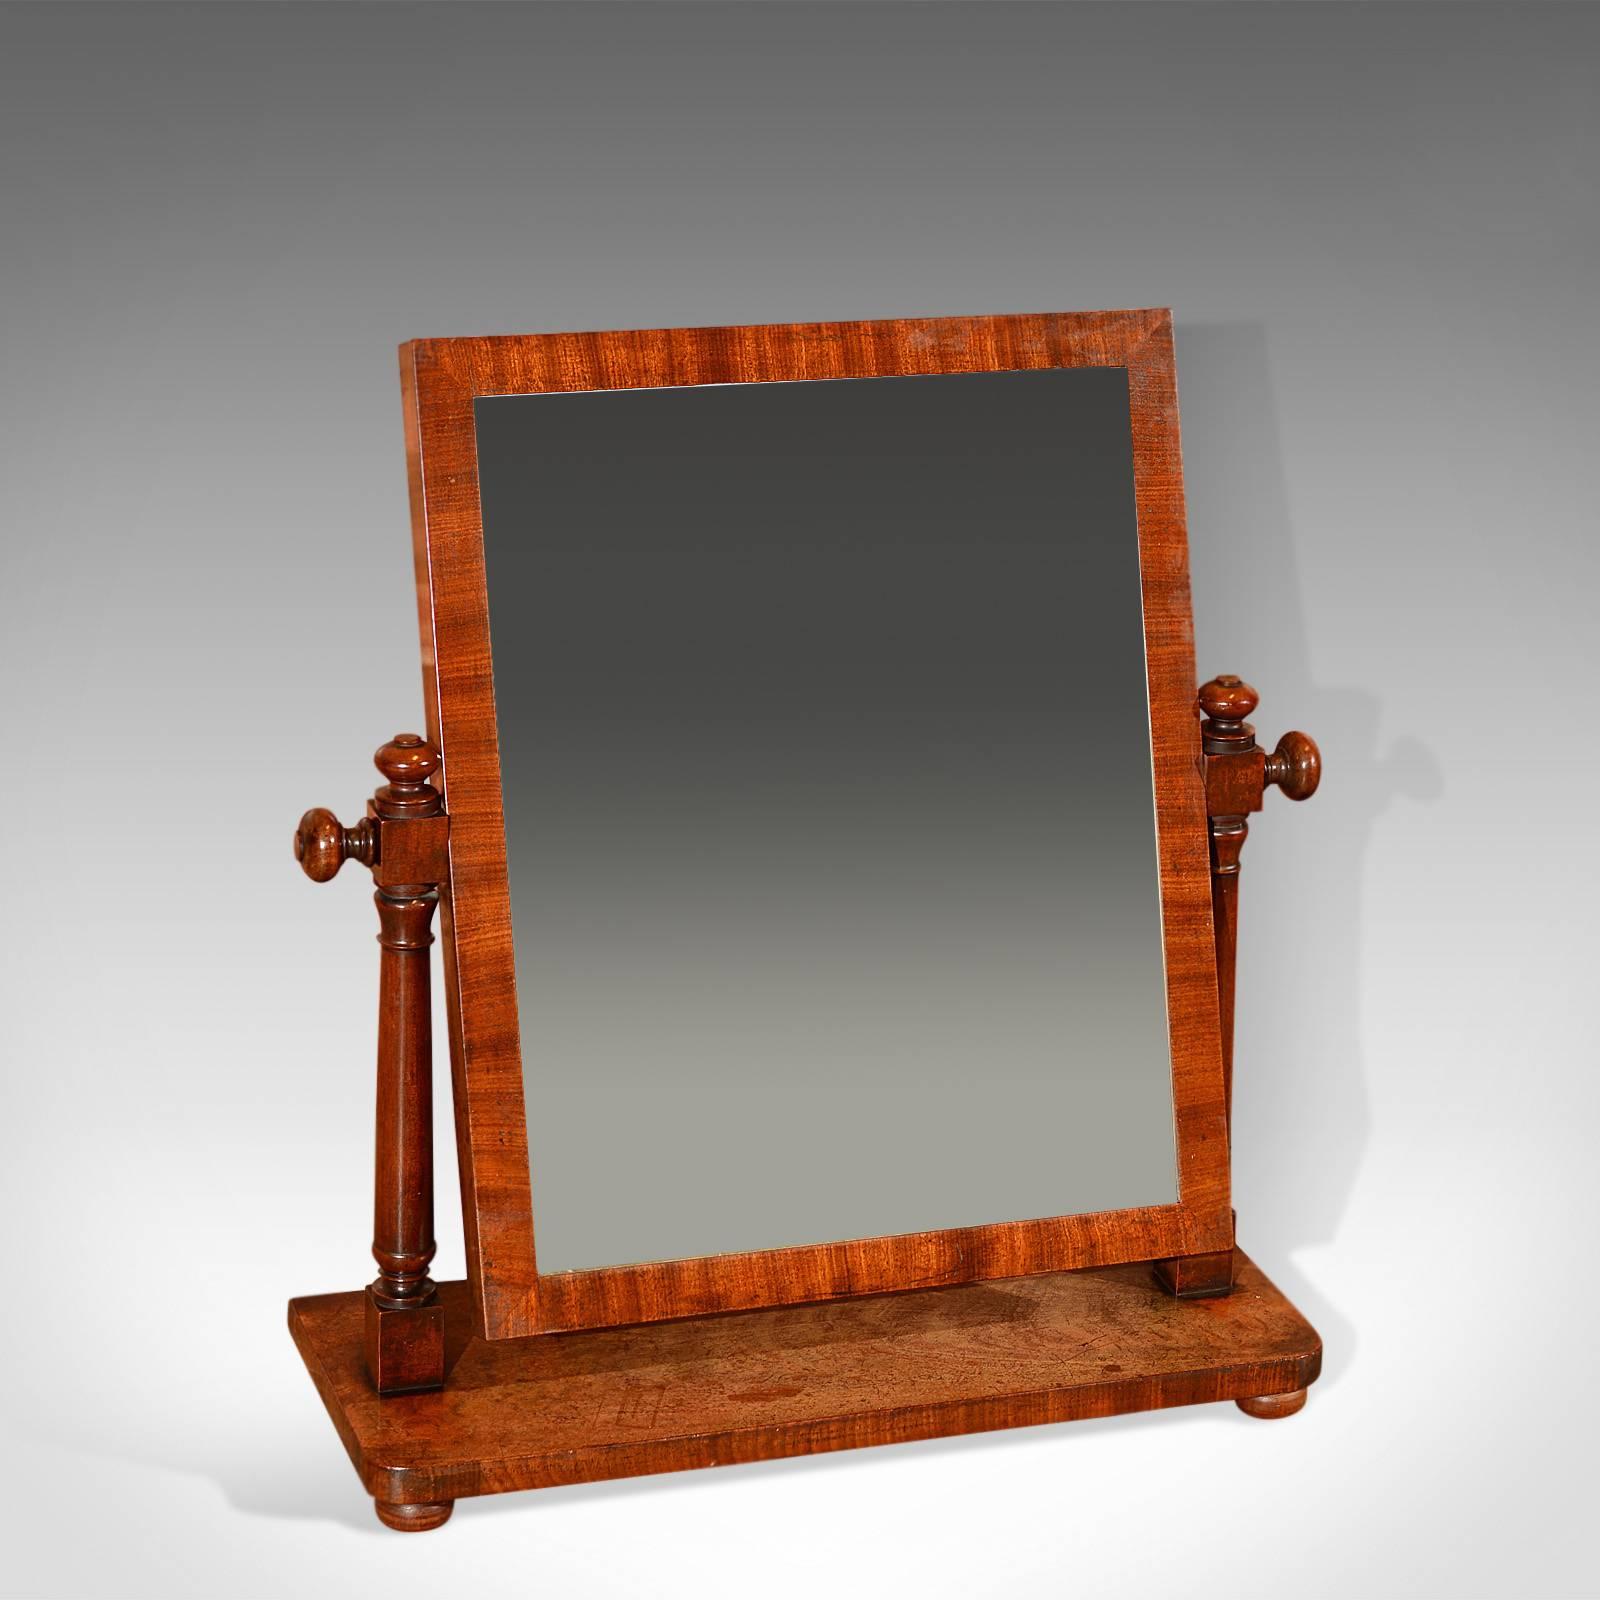 This is an antique, English, Regency platform toilet mirror dating to circa 1820.

Raised on flat bun feet the modest oblong platform, with rounded corners, displays desirable grain detail and patina and provides a stabile base for the beautifully